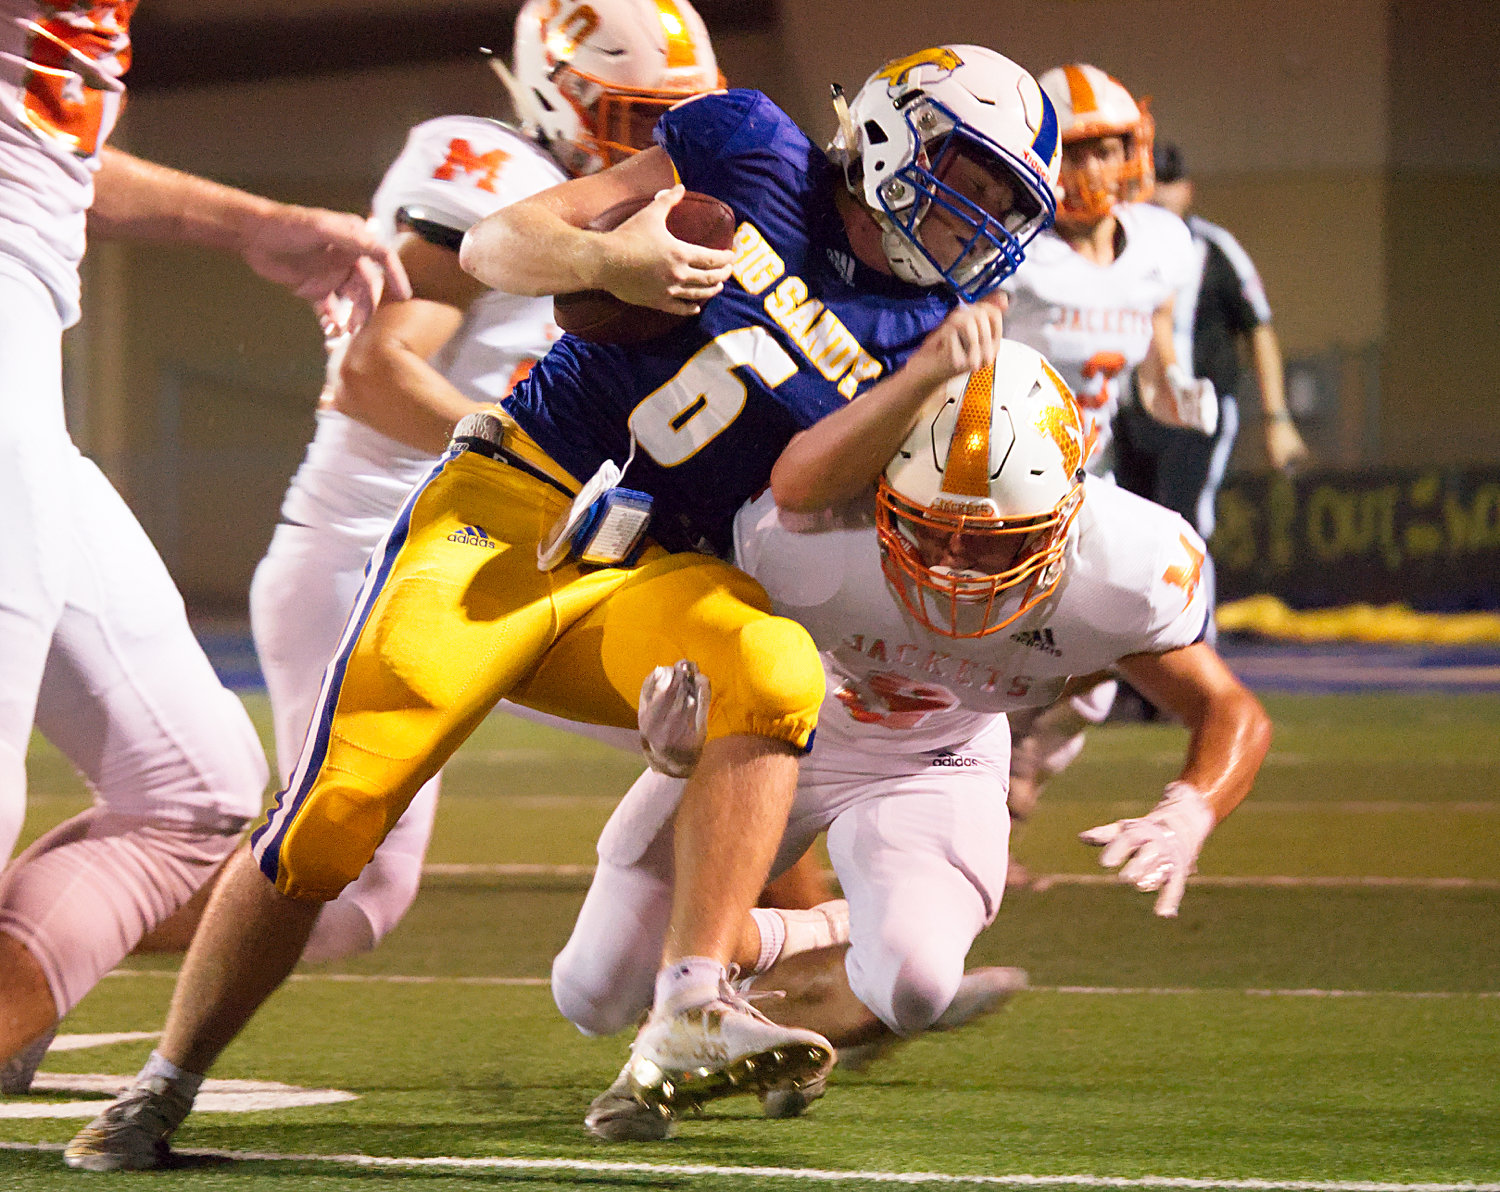 Drew Robertson of Mineola makes a tackle in Friday’s game against Big Sandy.